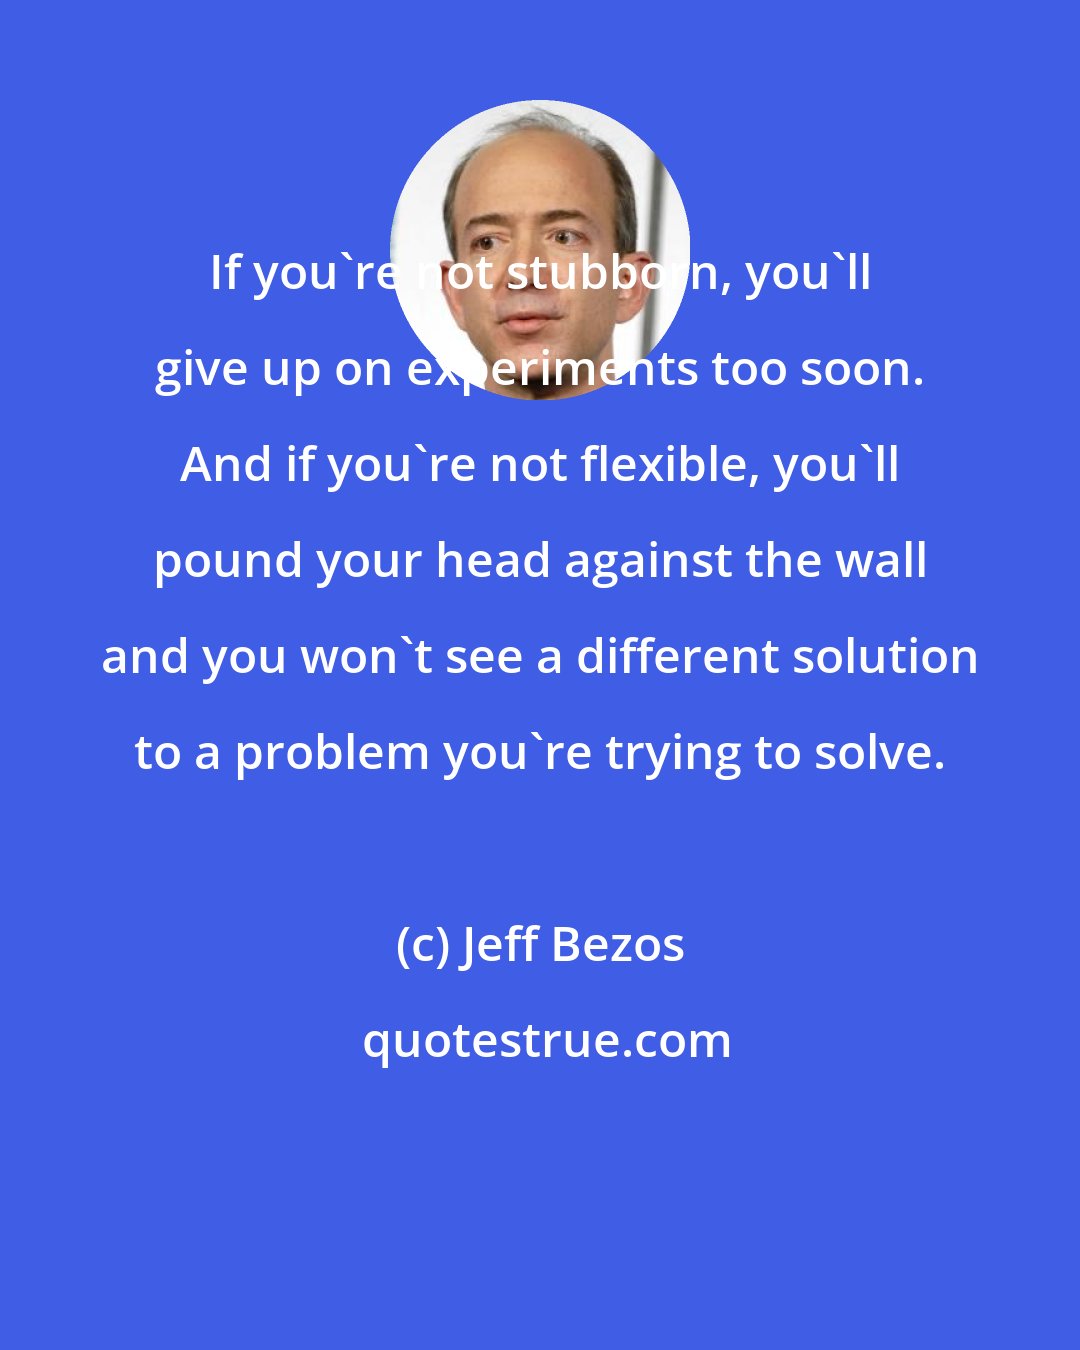 Jeff Bezos: If you're not stubborn, you'll give up on experiments too soon. And if you're not flexible, you'll pound your head against the wall and you won't see a different solution to a problem you're trying to solve.